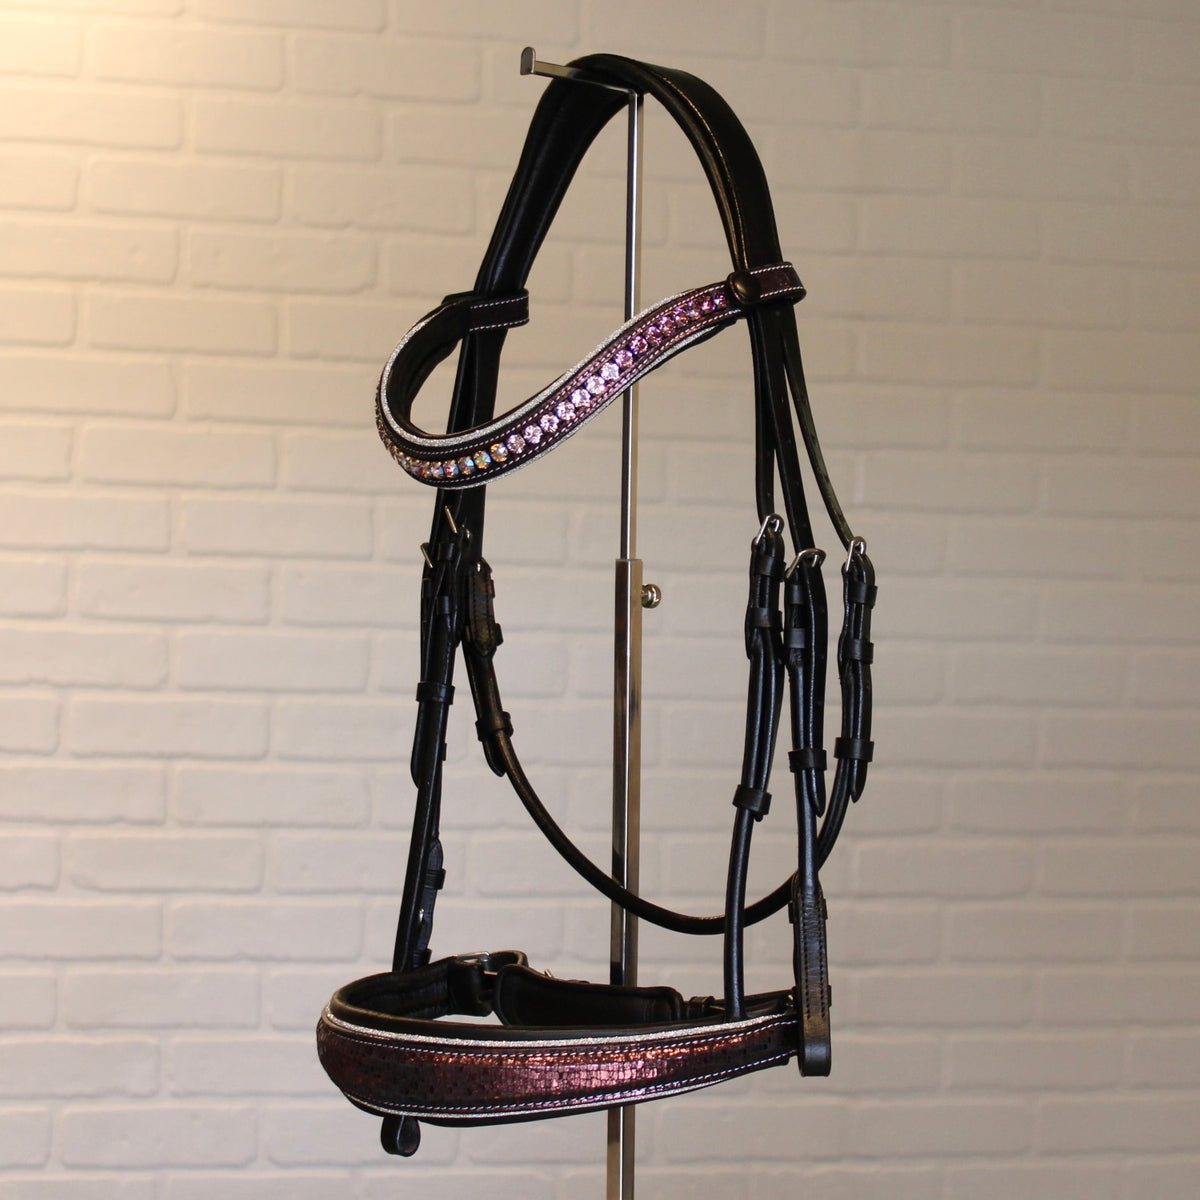 The Sophisticate Black Rolled Leather Snaffle Bridle